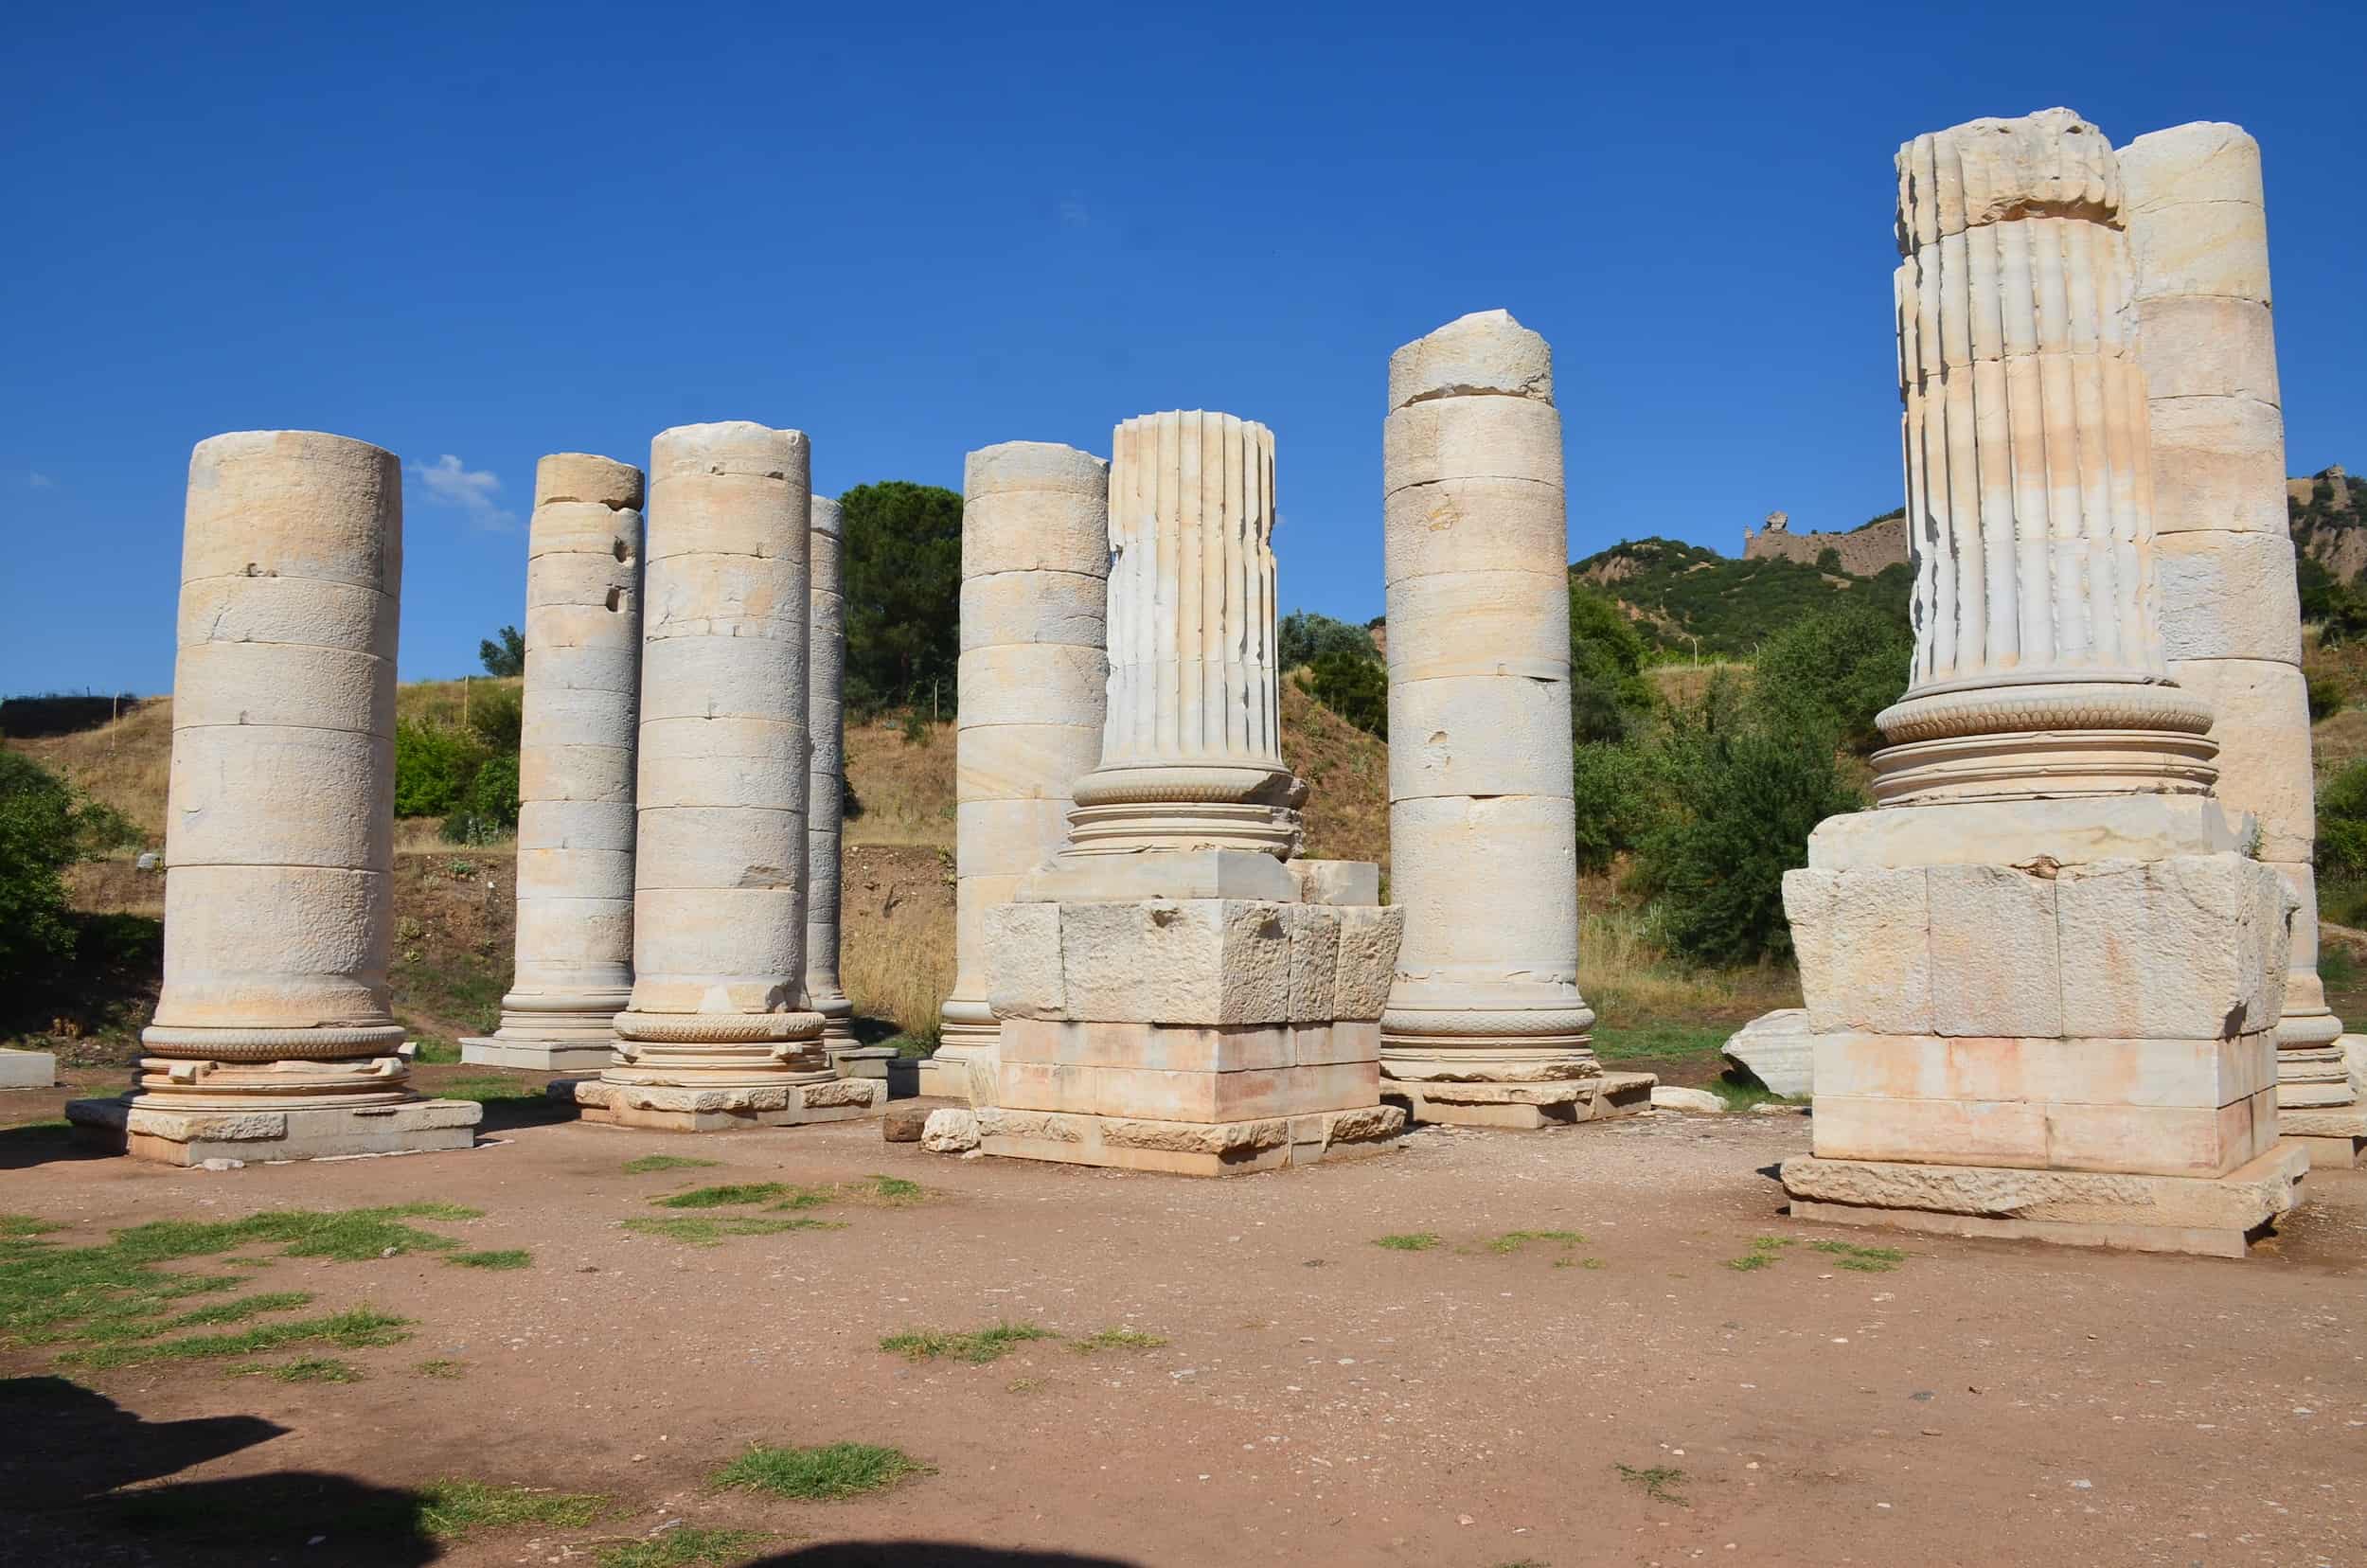 Unfinished colonnade with with fluted columns on pedestals of the Temple of Artemis